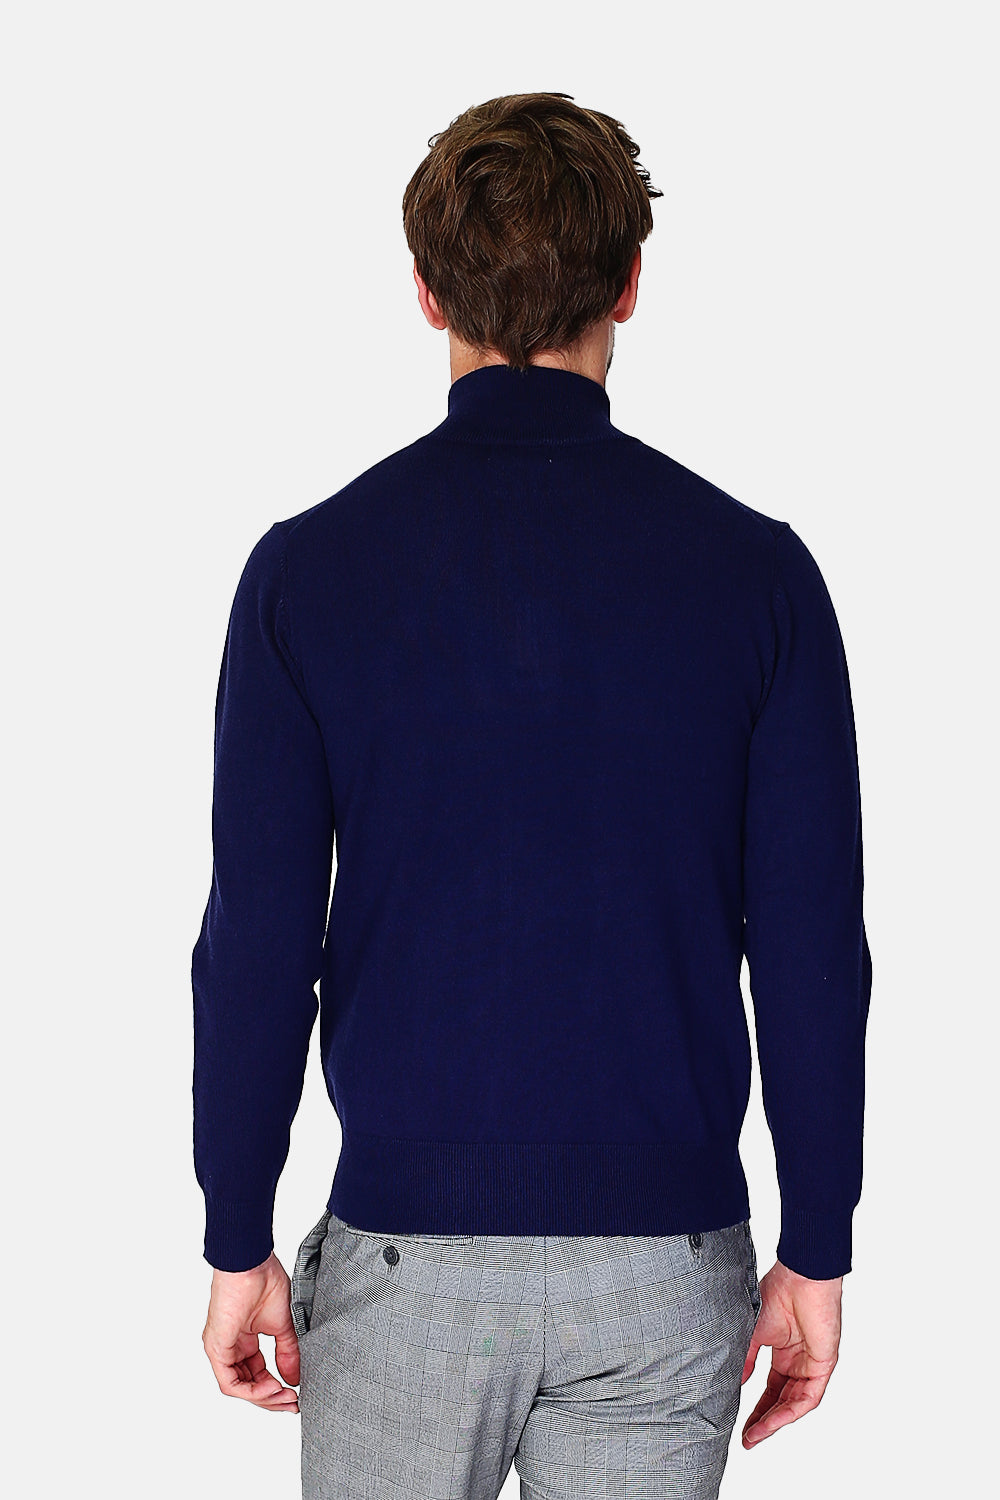 Zipped trucker neck sweater with long sleeves knitting in 3 threads